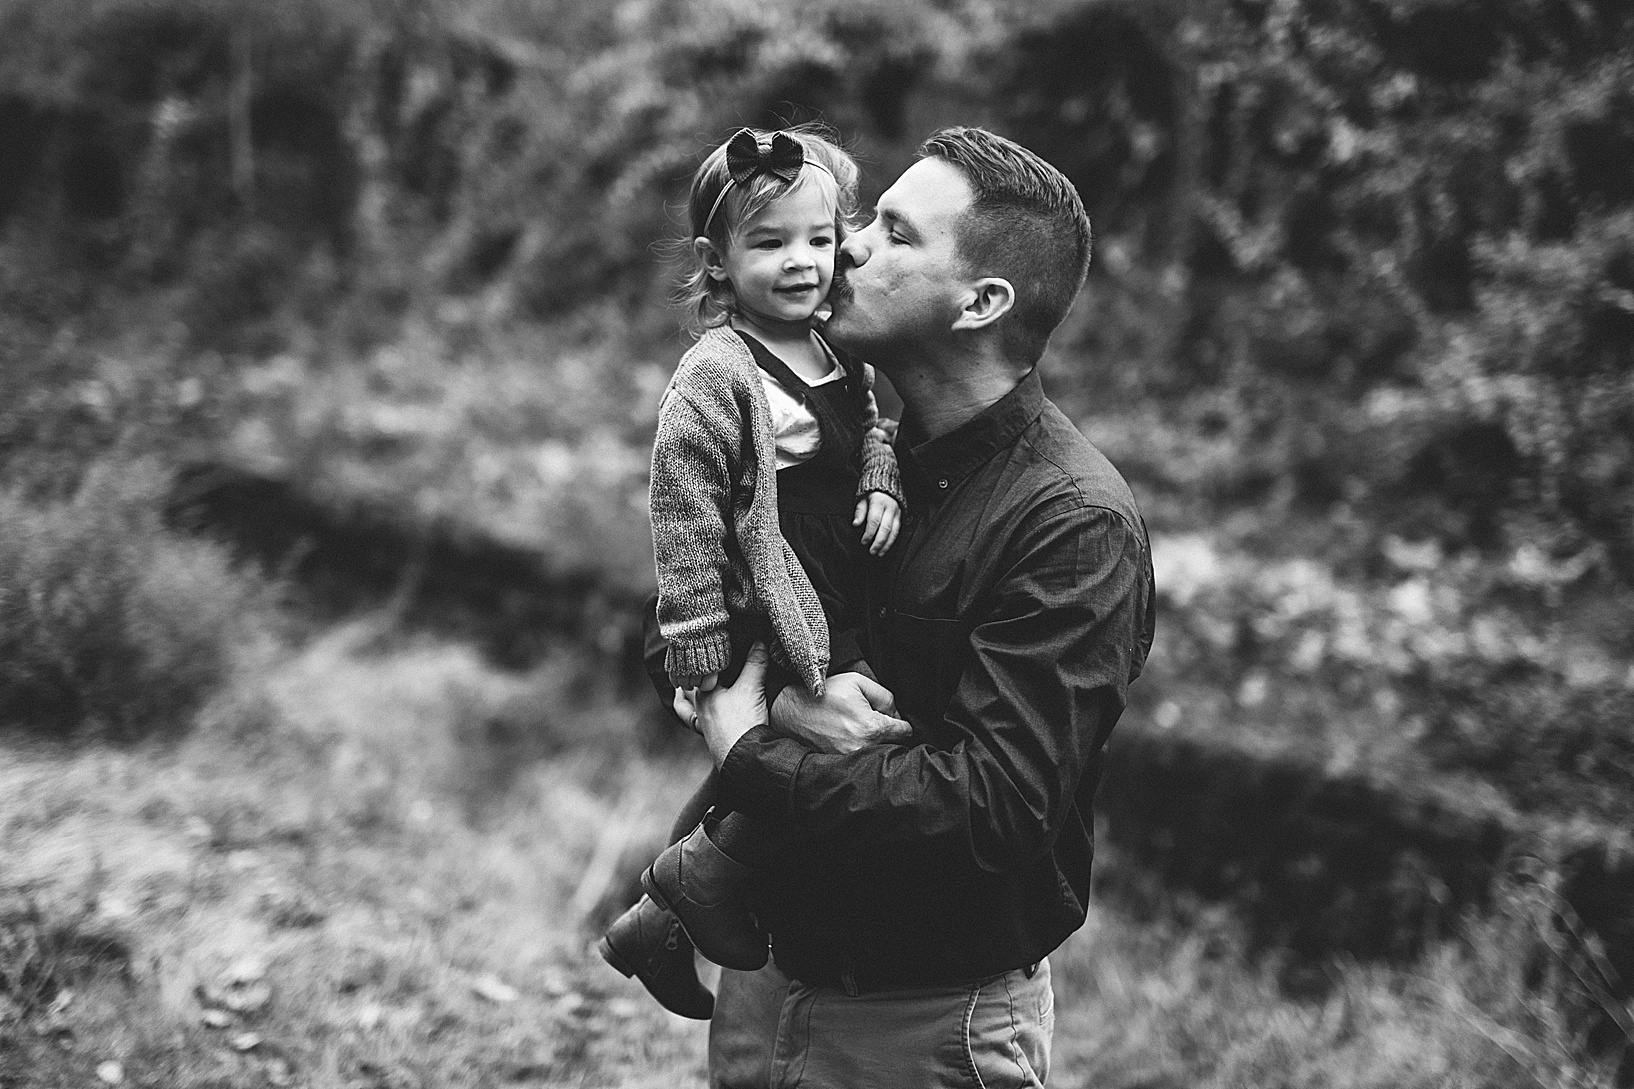 Brunette man kisses his daughter on the cheek as he holds her.